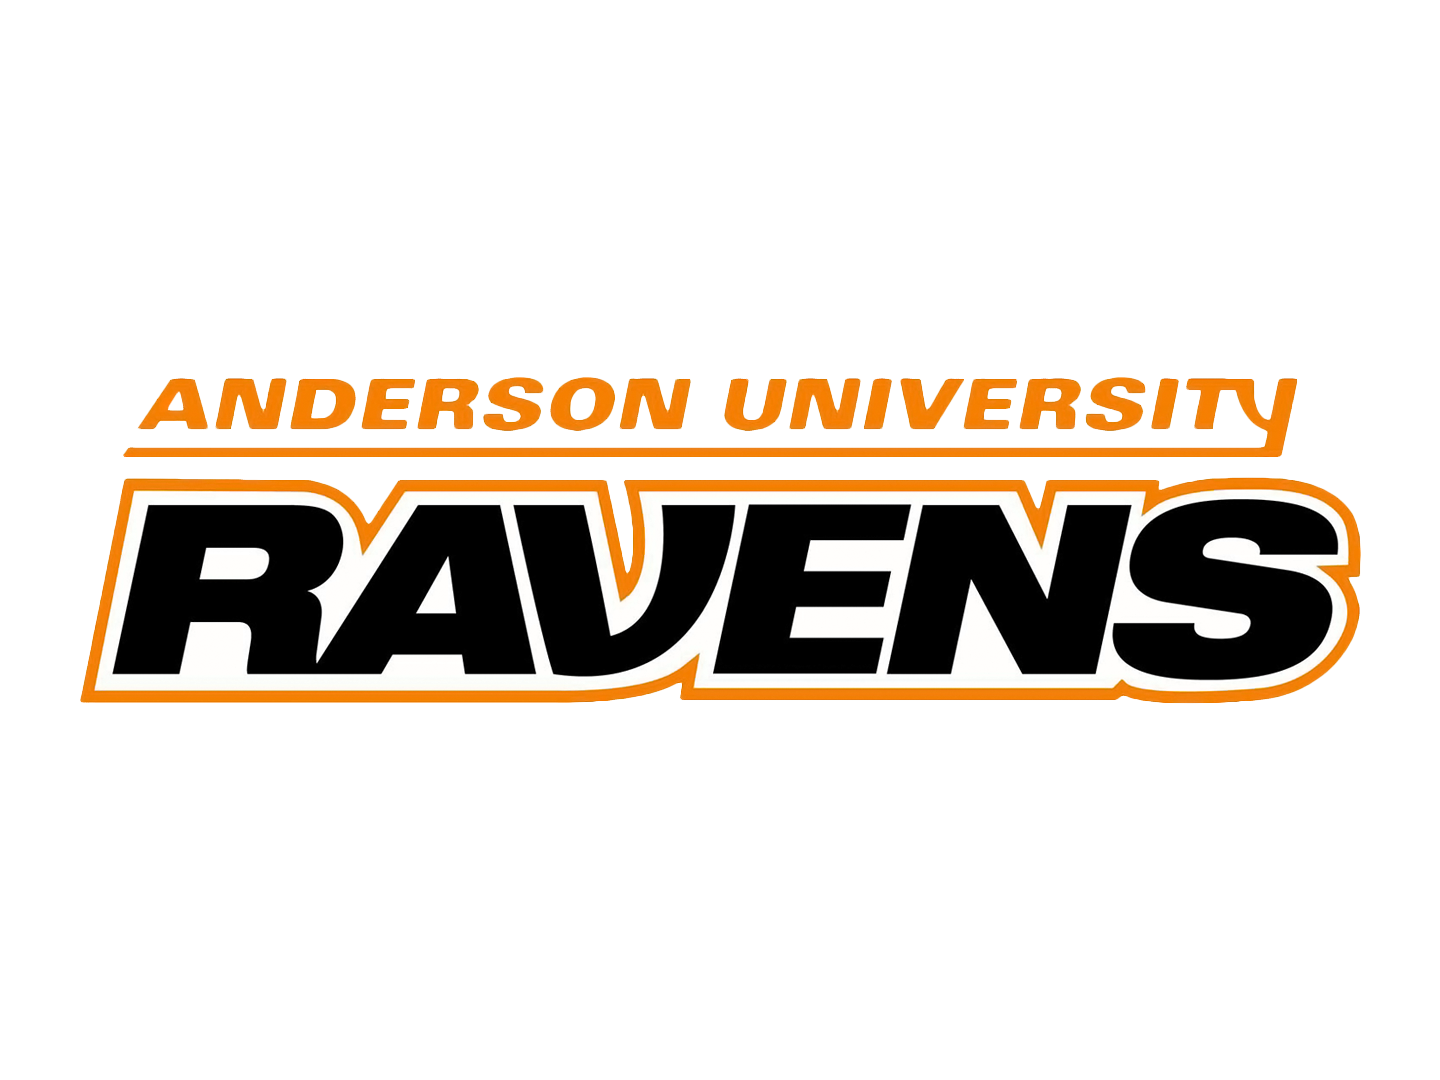 Anderson (Ind.)